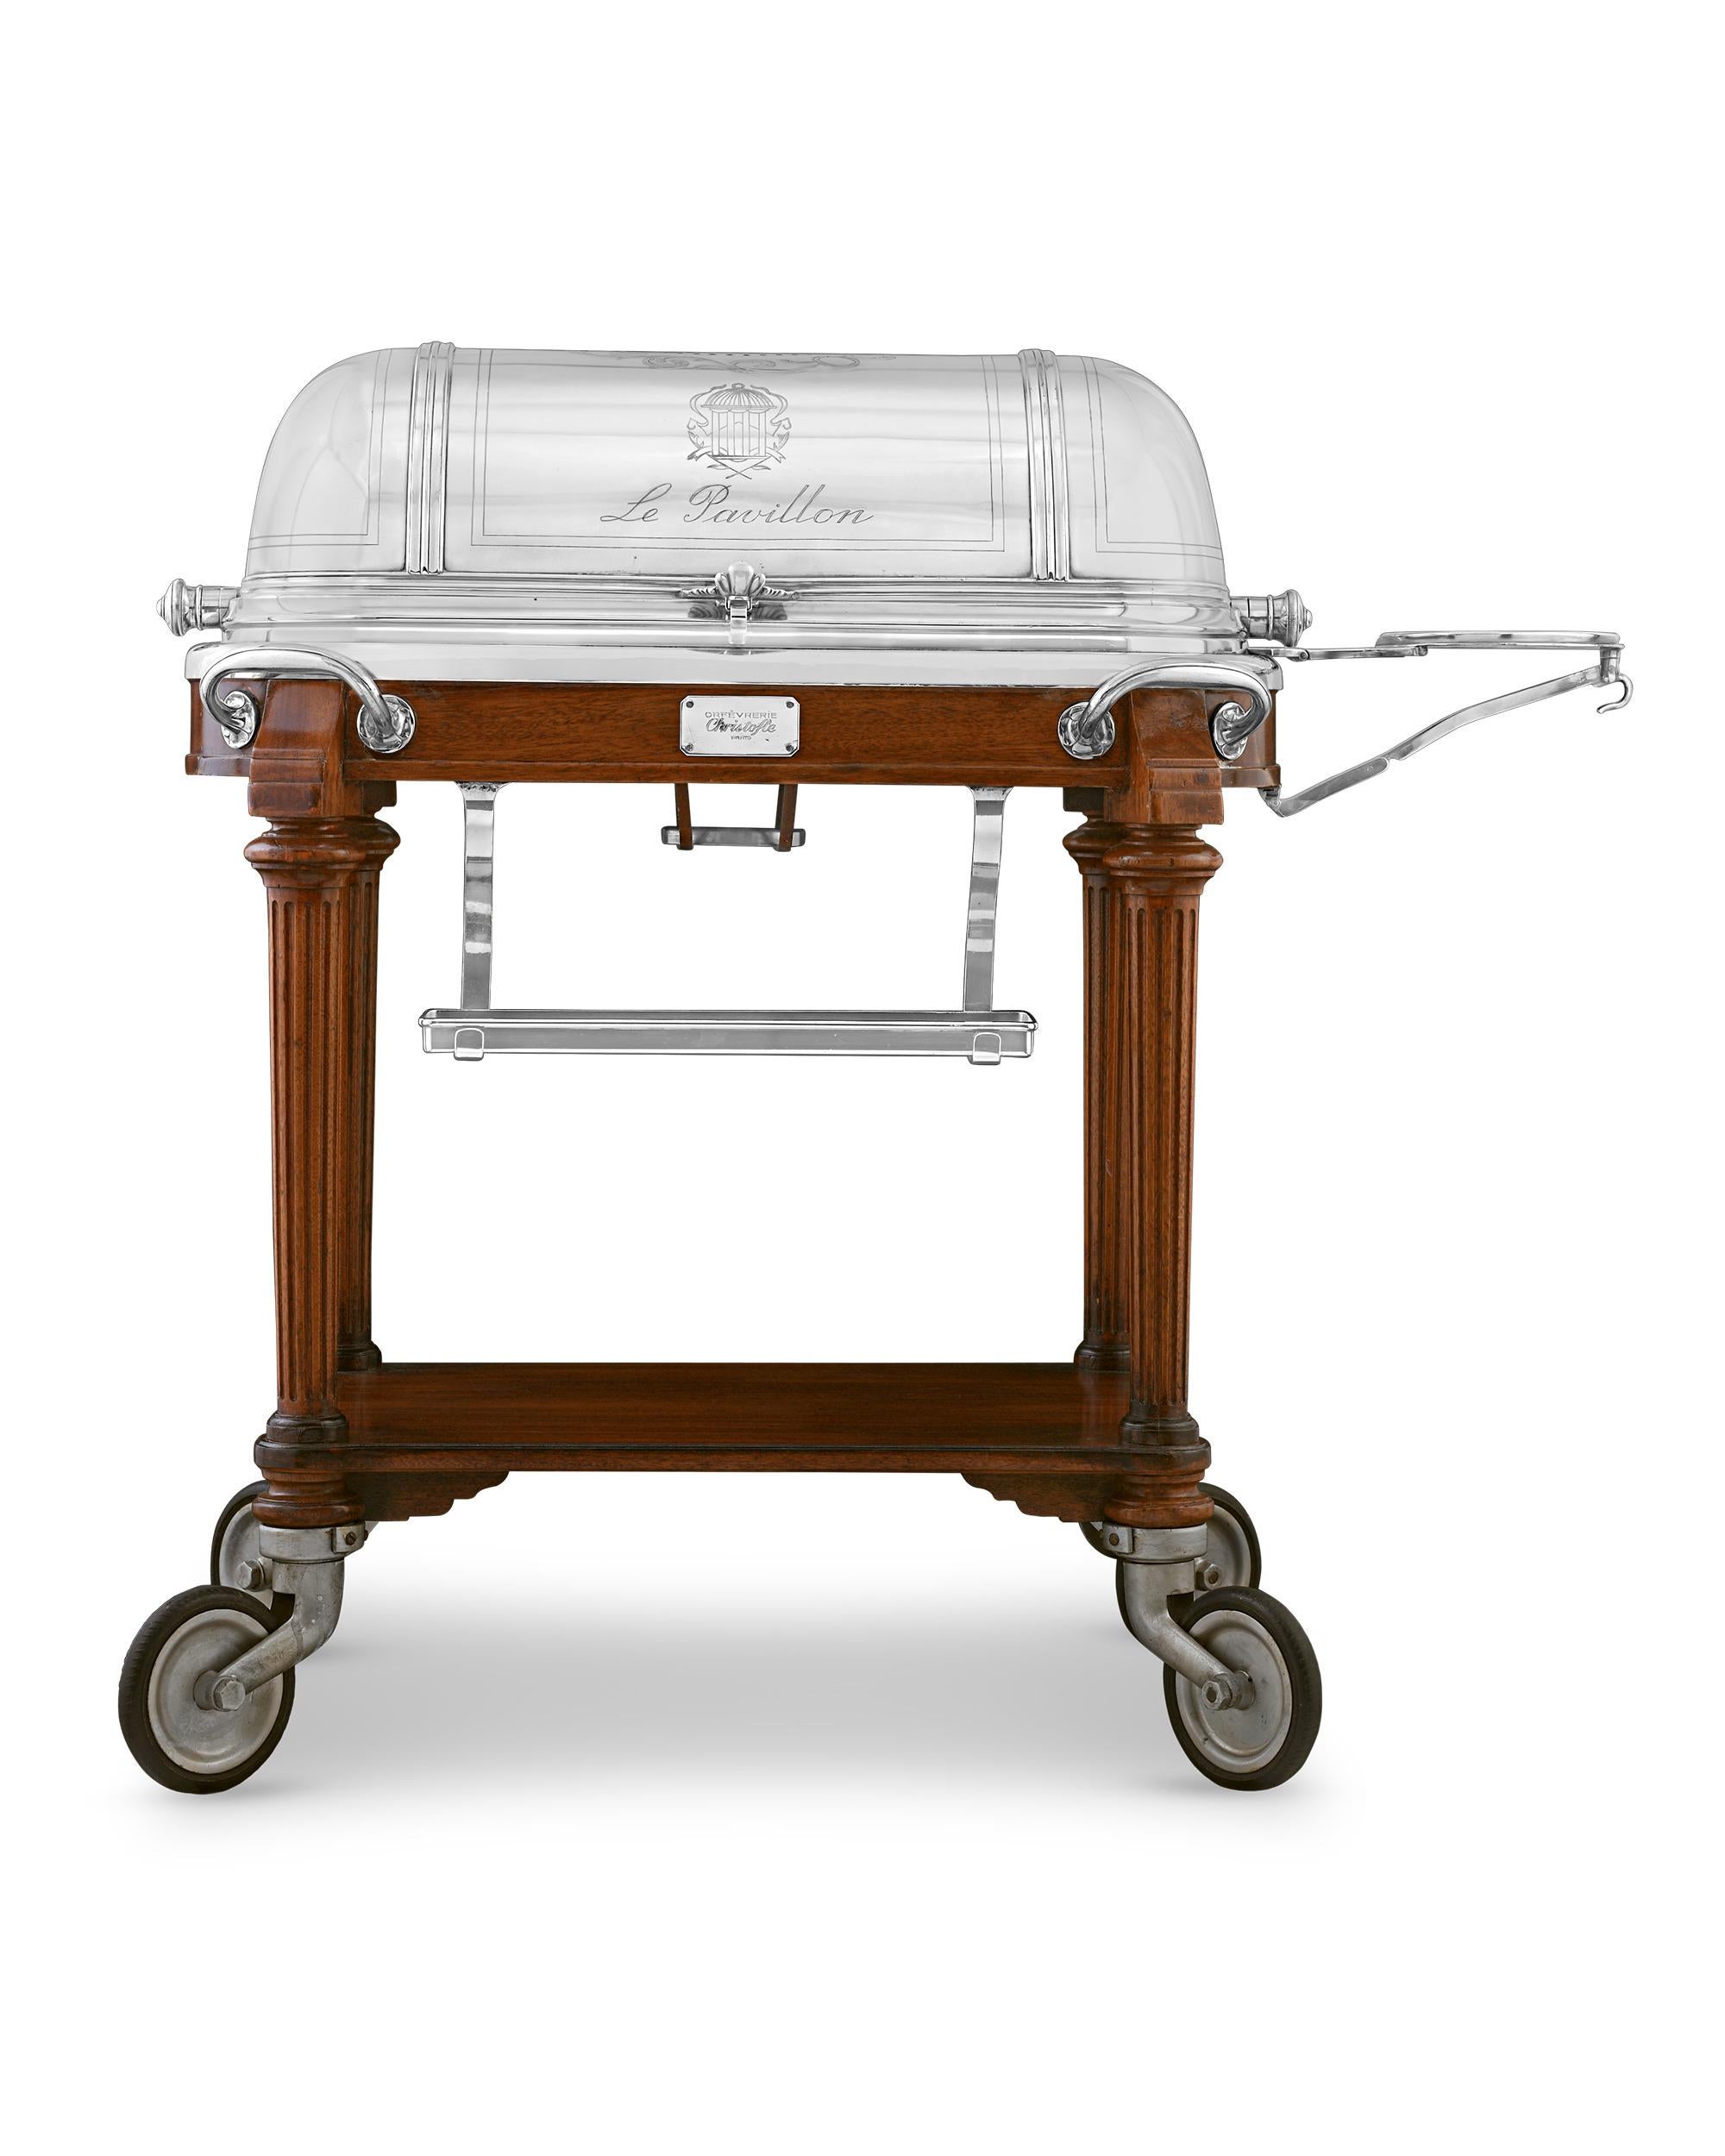 This extraordinary silverplate meat carving trolley was crafted in the 1940s by the prestigious firm Christofle & Cie for New York City’s premier restaurant of the day, Le Pavillon. The top of the shiny domed lid is emblazoned with the restaurant's